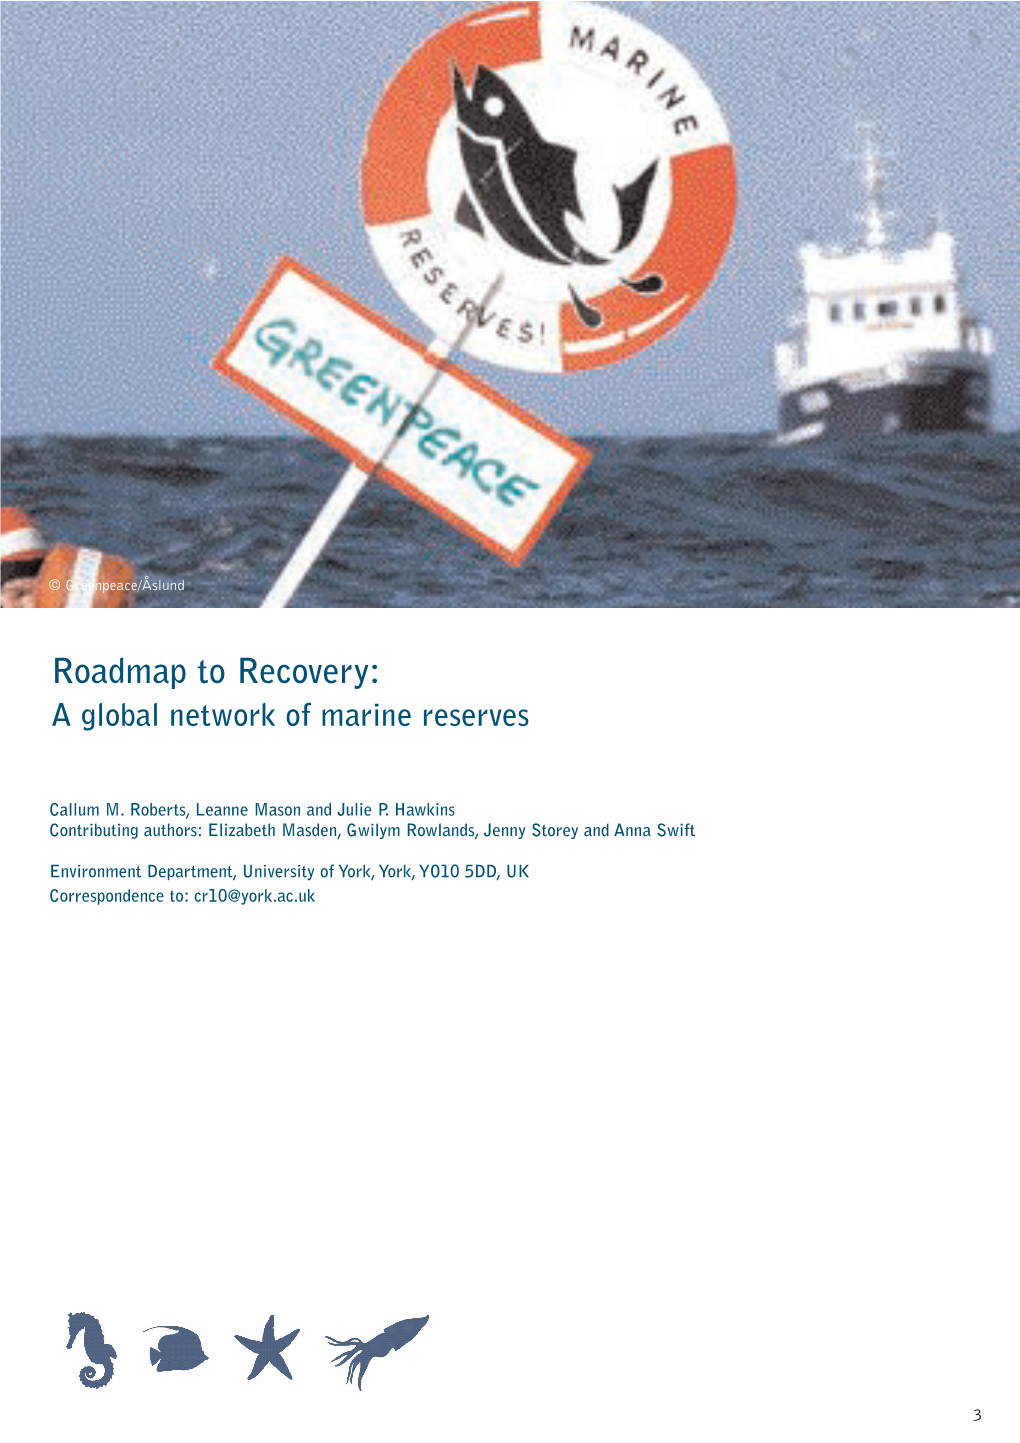 Roadmap to Recovery: a Global Network of Marine Reserves